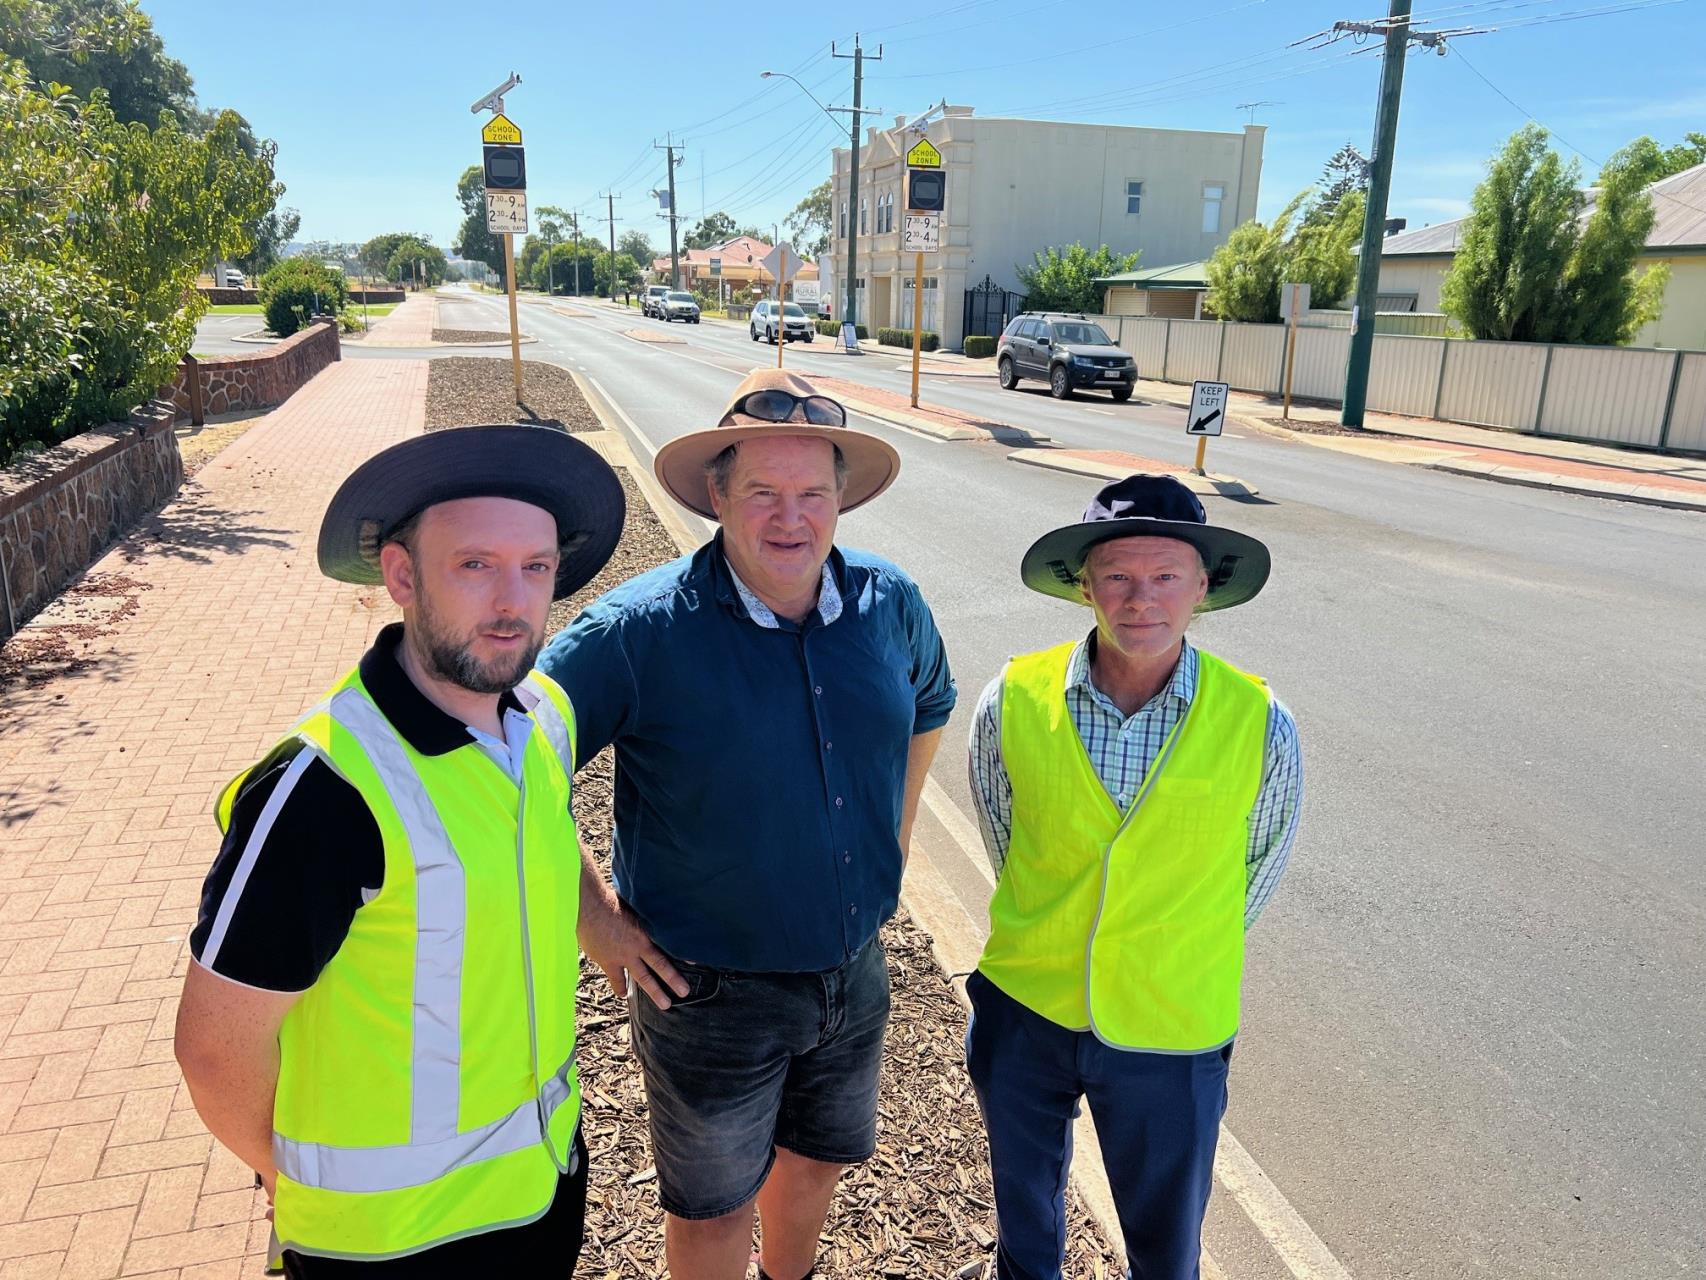 Photo caption: Checking out the Ferguson Road section which will be closed for road surface upgrades for a week, starting tomorrow, are the Shire of Dardanup President Cr Tyrrell Gardiner (centre) with the Shire’s Project Development Engineer James Reilly (left) and Senior Design Officer Brad Batrick.